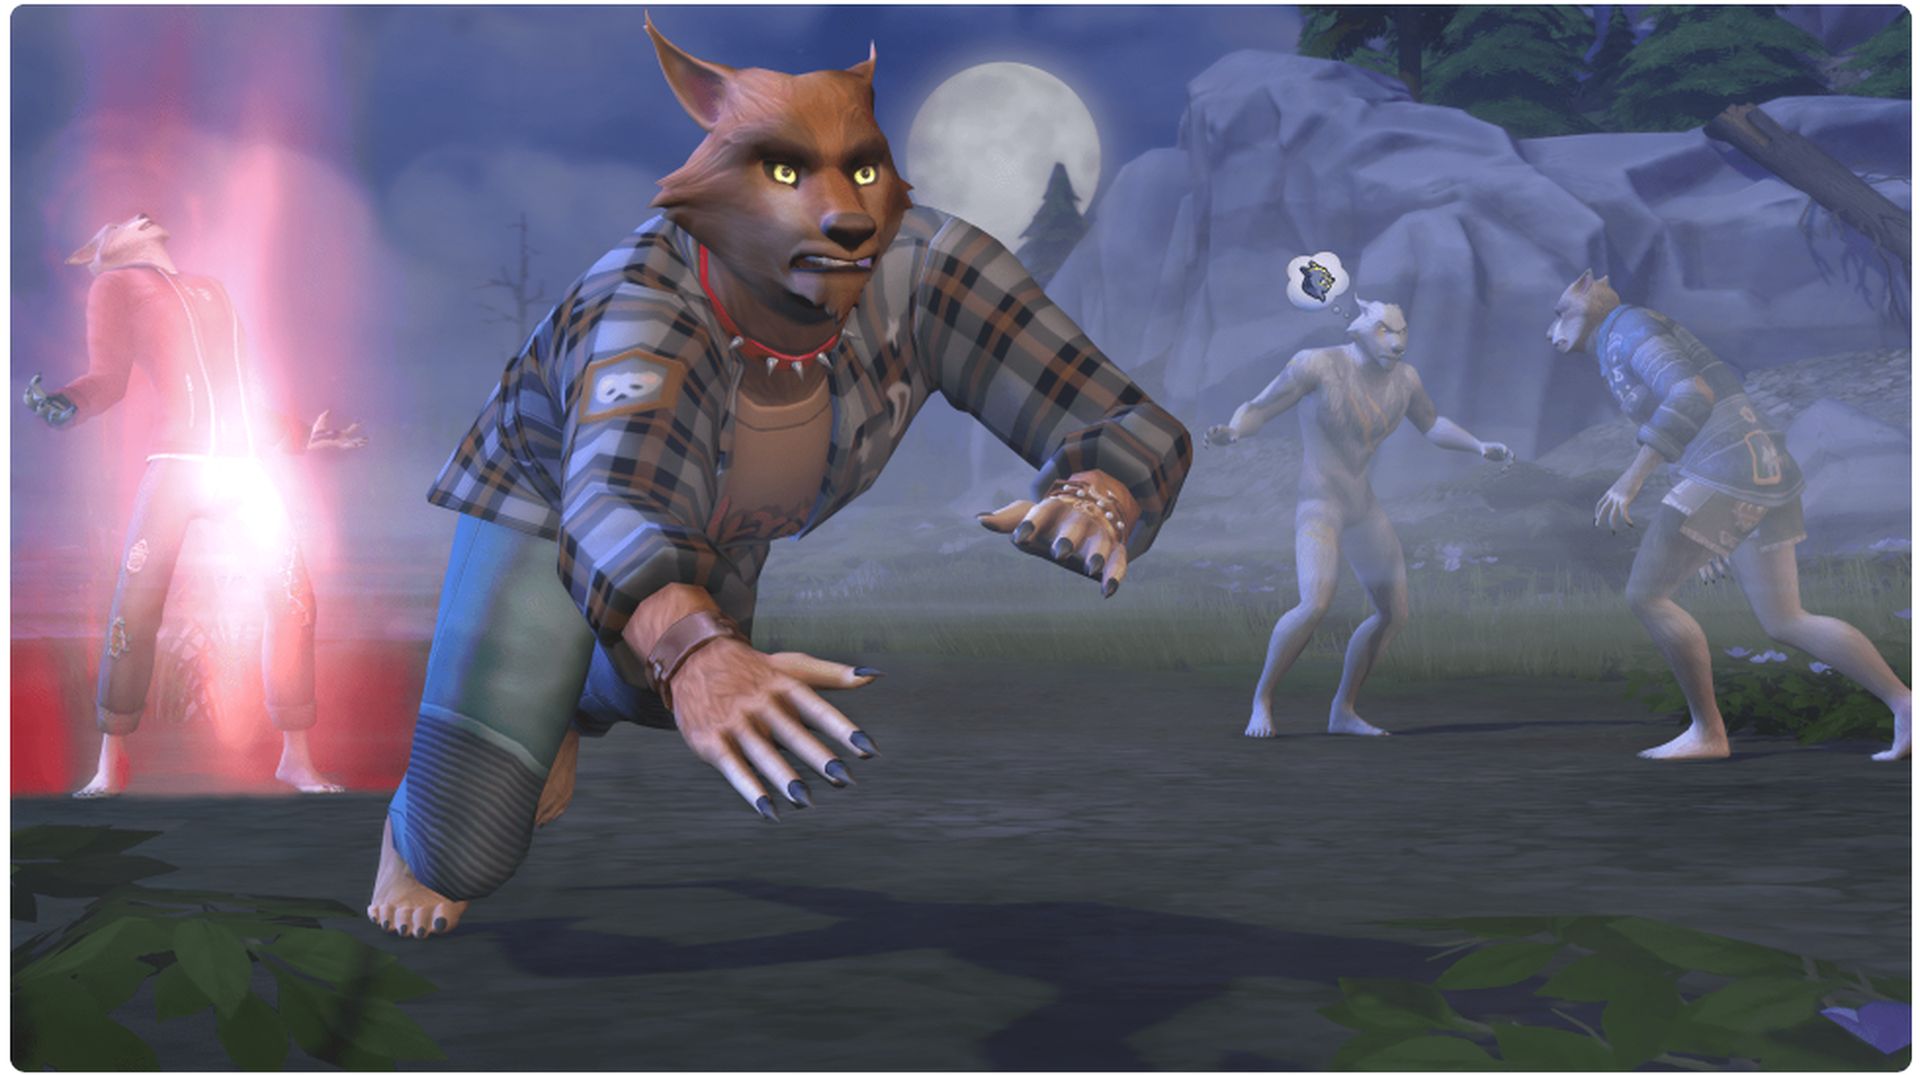 In this article, we are going to be covering how to become werewolf Sims 4, so you can turn your Sim into a nocturnal creature and spread fear among others.